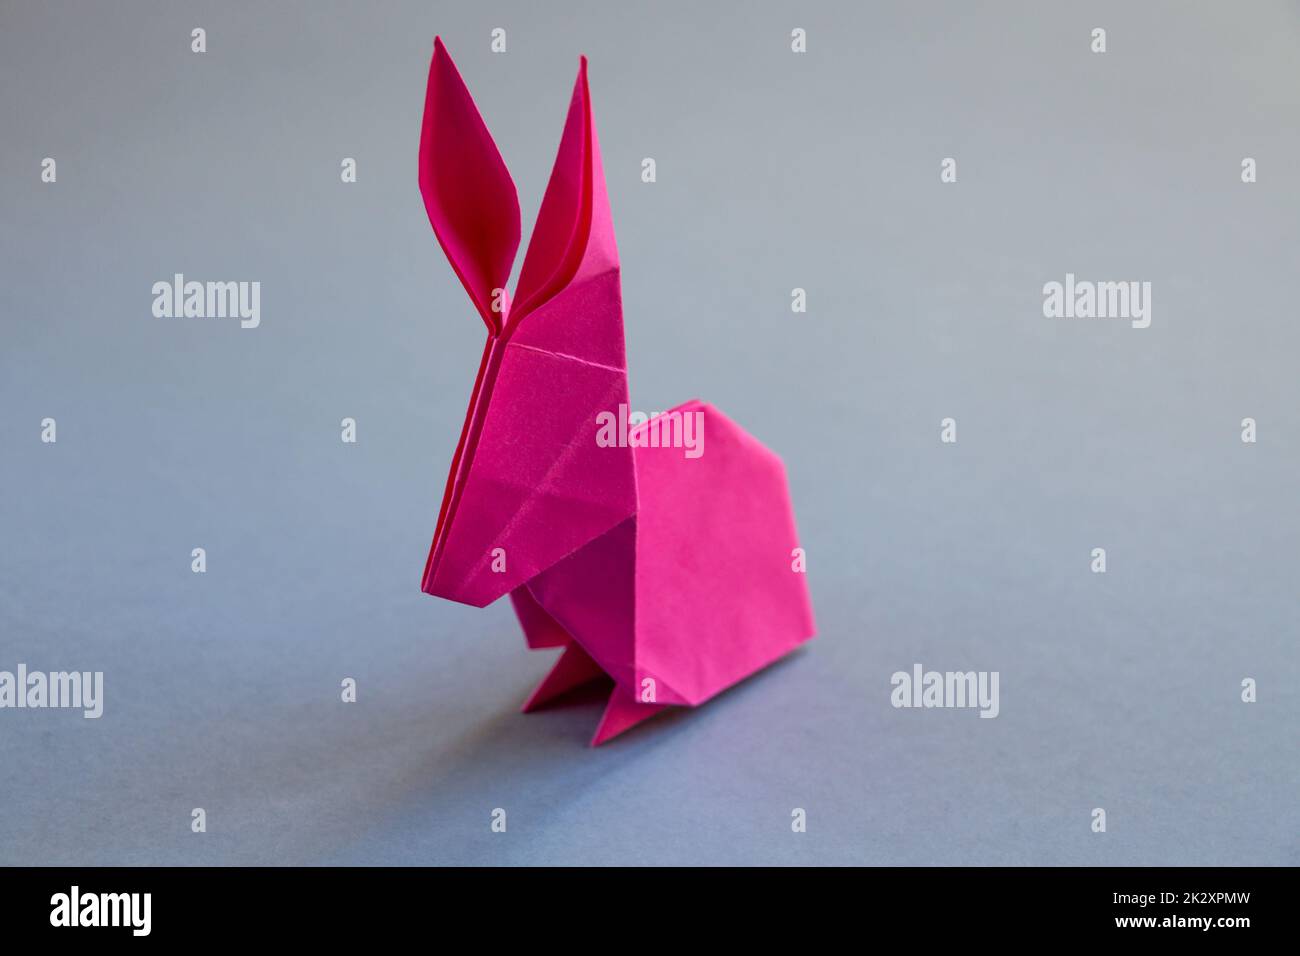 Pink paper rabbit origami isolated on a grey background Stock Photo